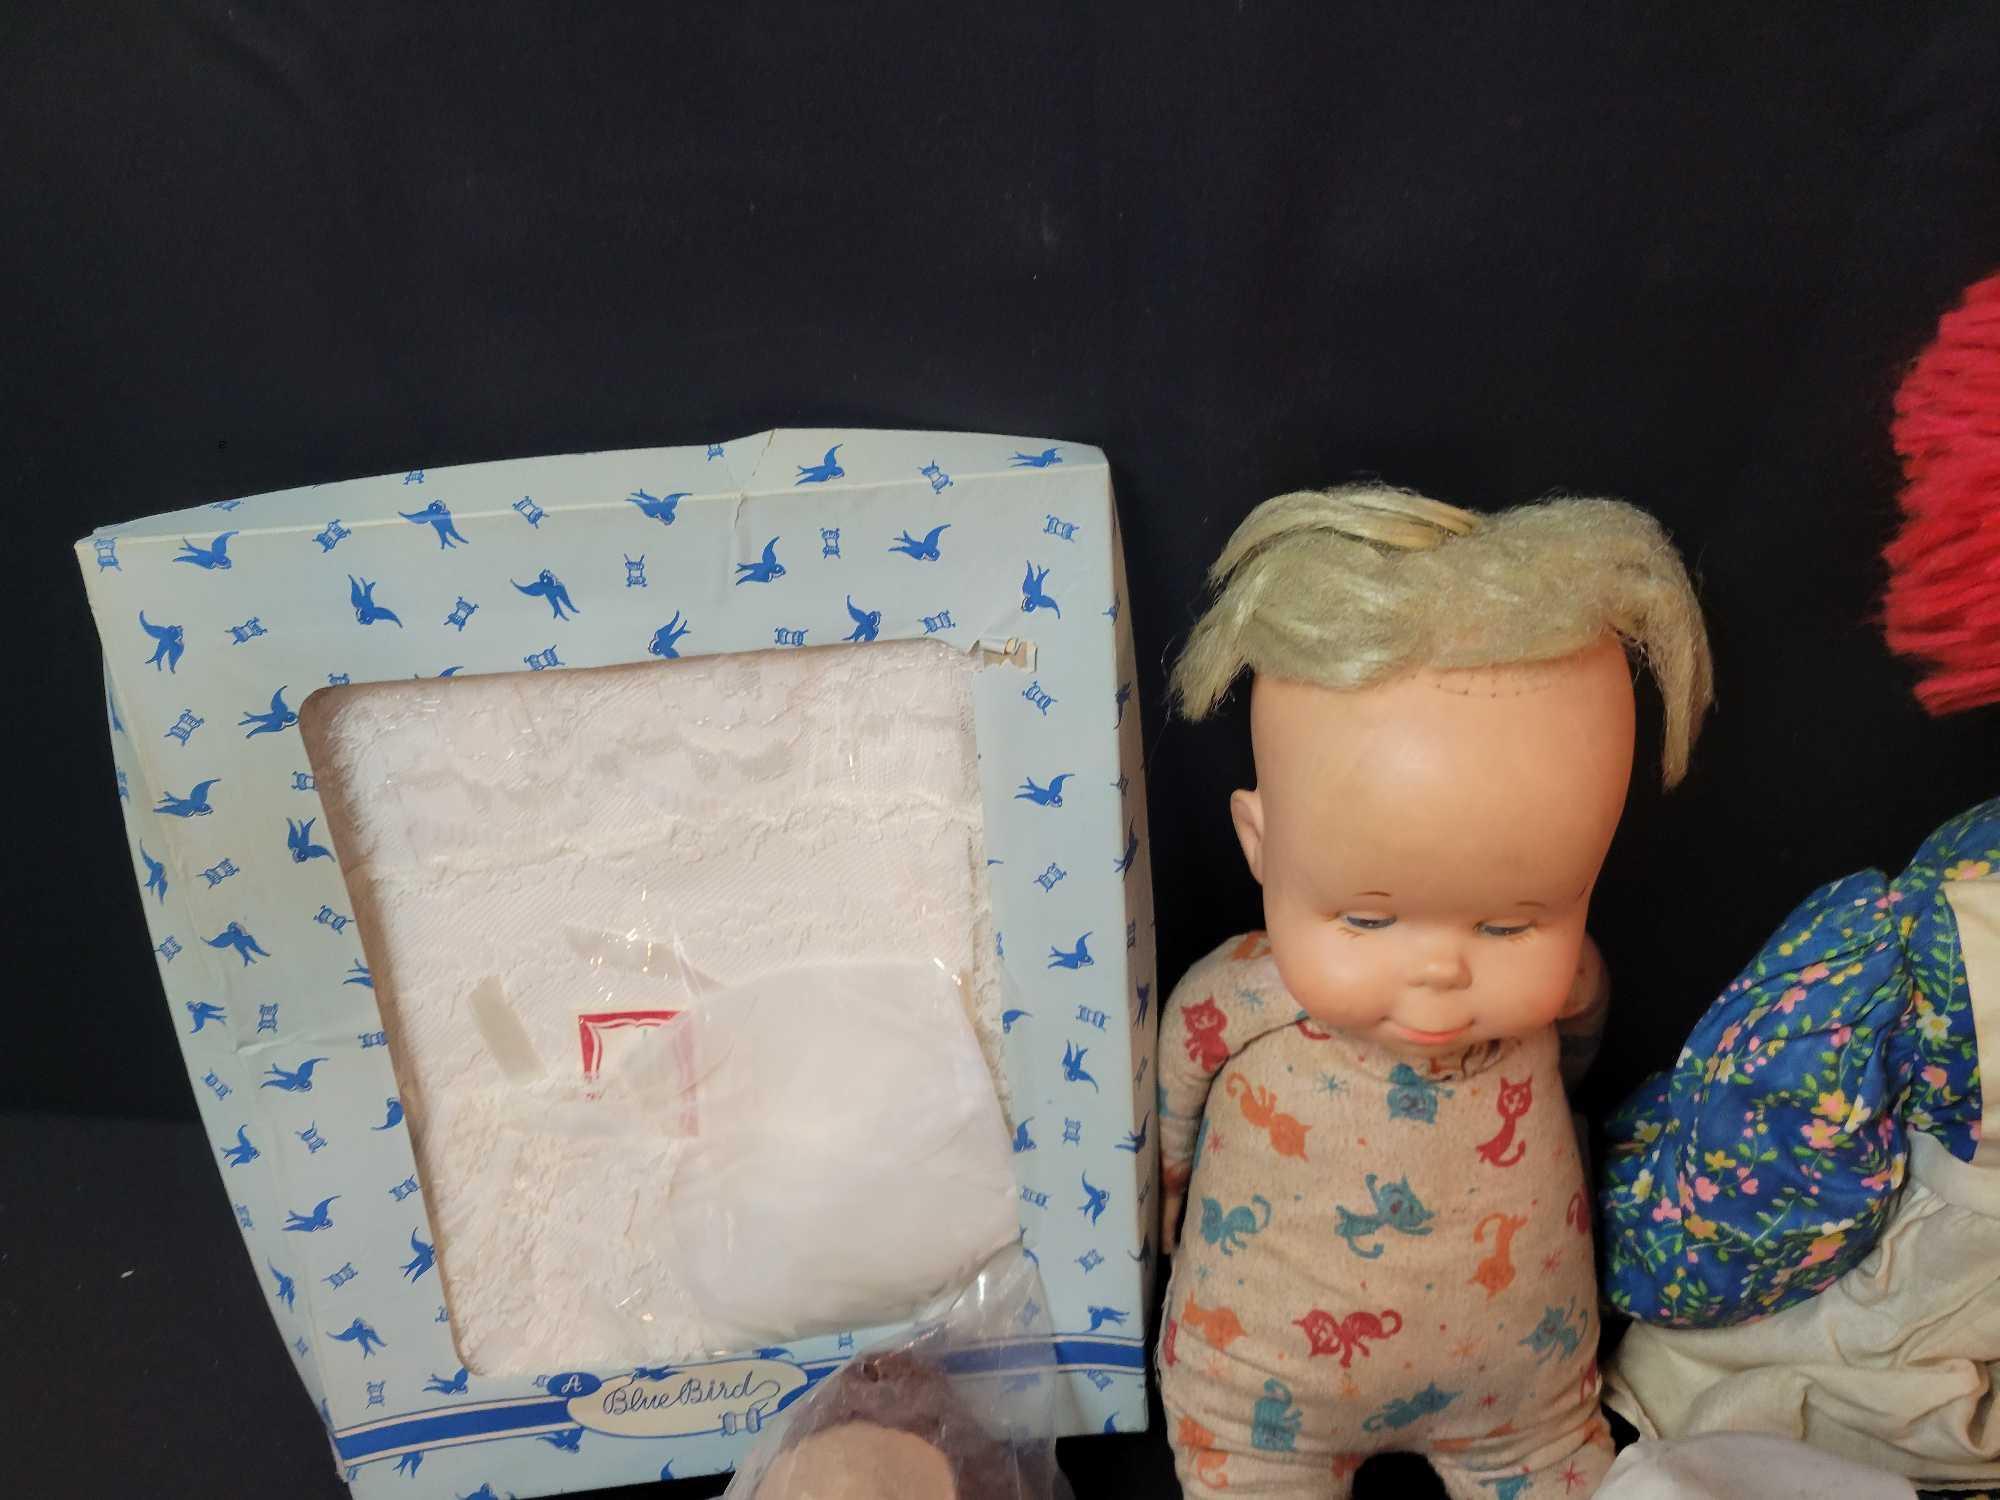 Assorted vintage baby dolls, puppets, kewpie dolls, clothing